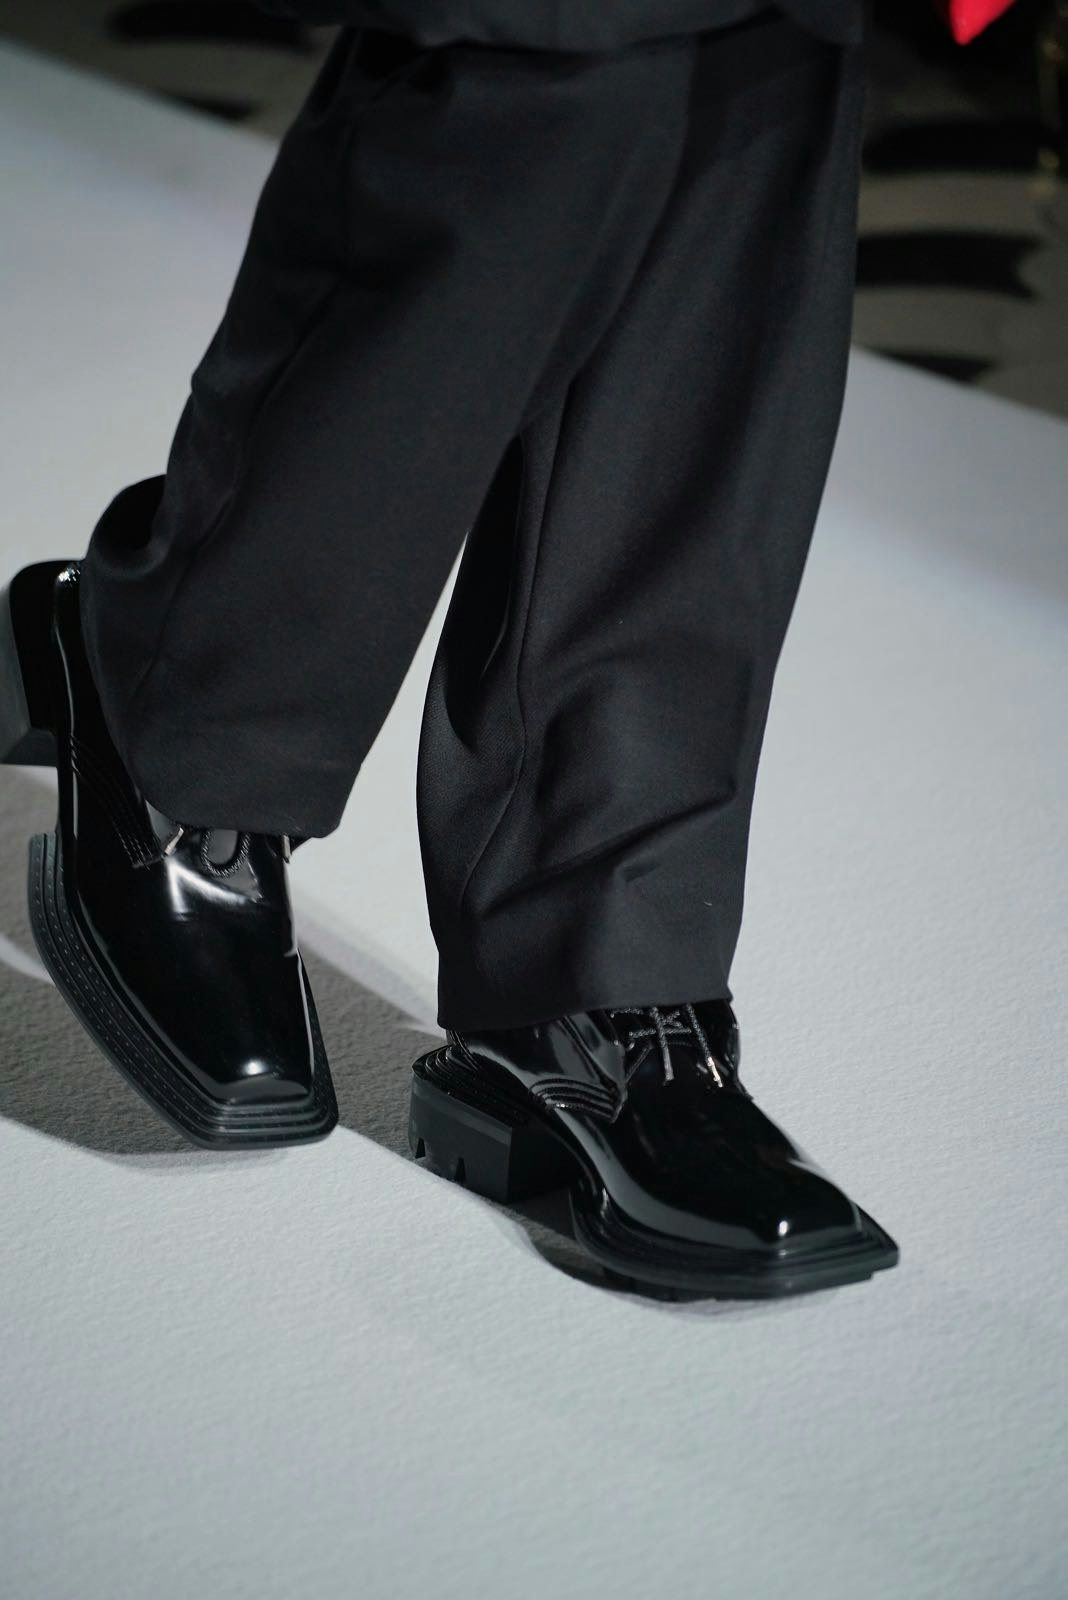 Untitlab brought its bold footwear trademark to Chenpeng's Paris Fashion Week show. Photo: Chenpeng